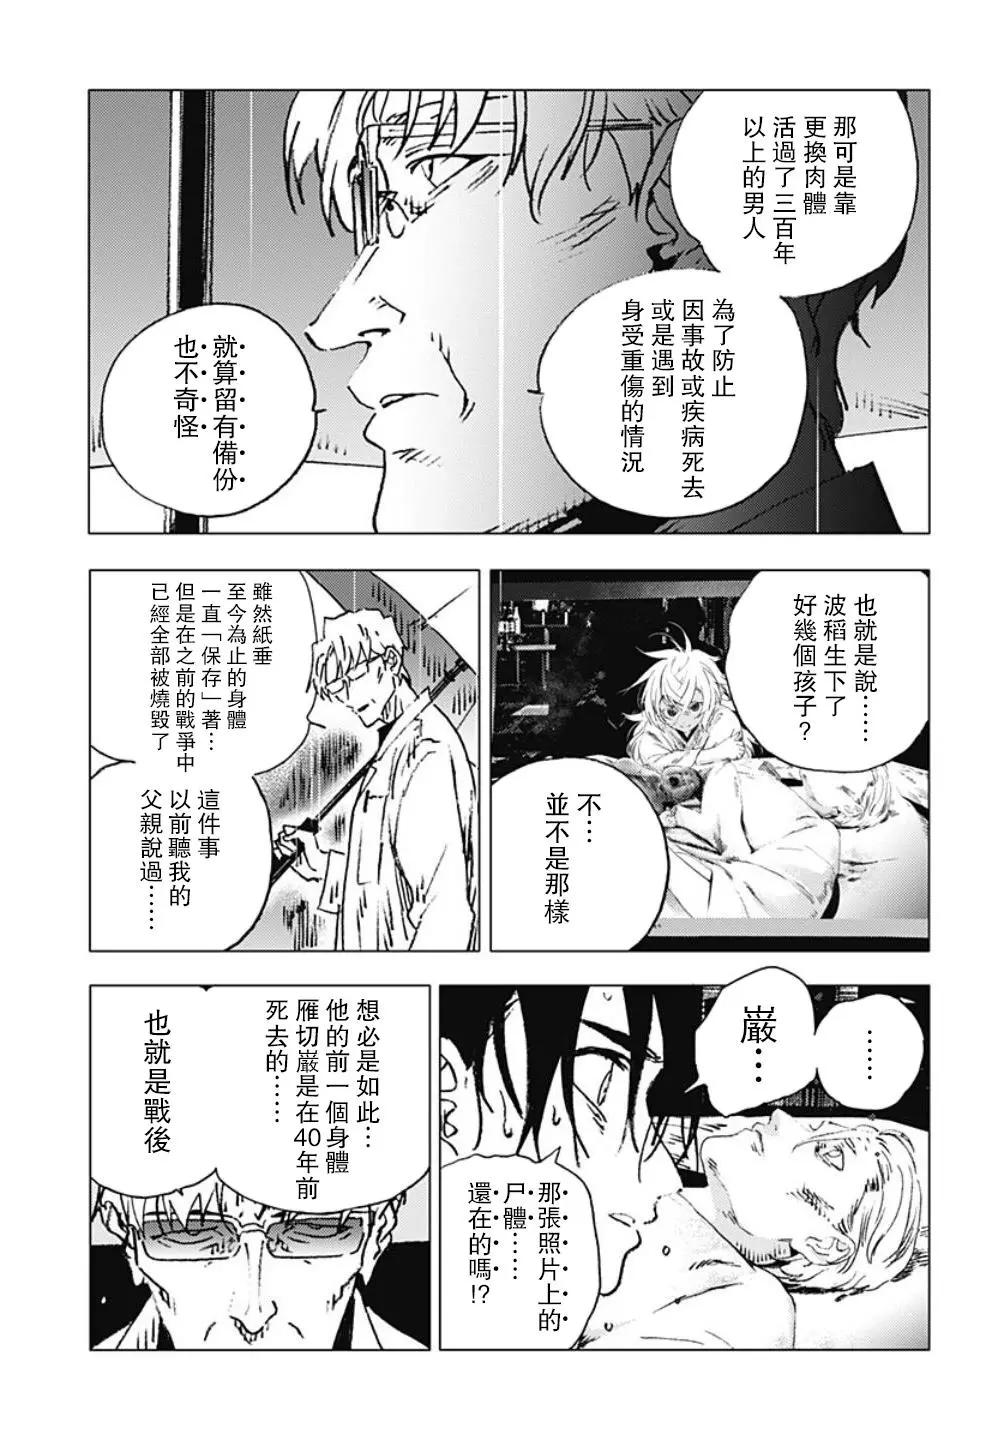 Summer time rendering - 第114話 - 1